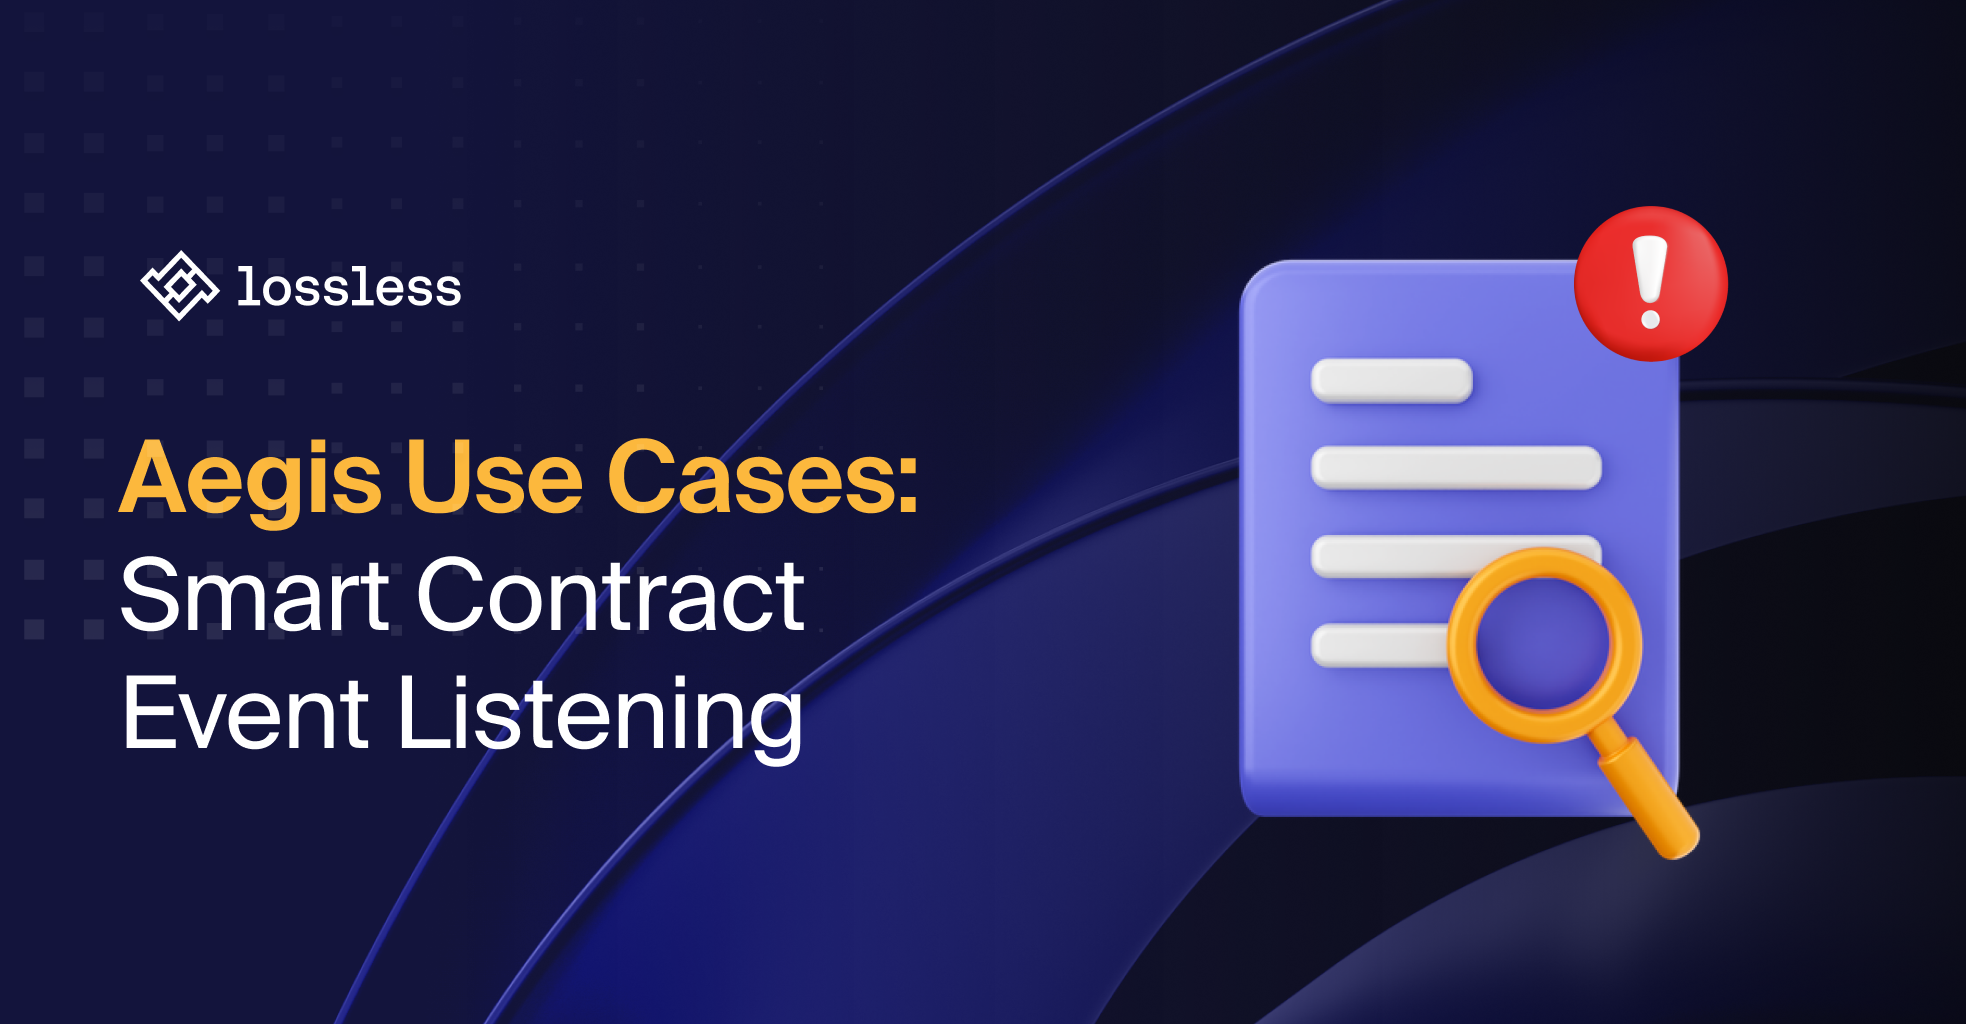 Aegis Use Cases: Smart Contract Event Listening